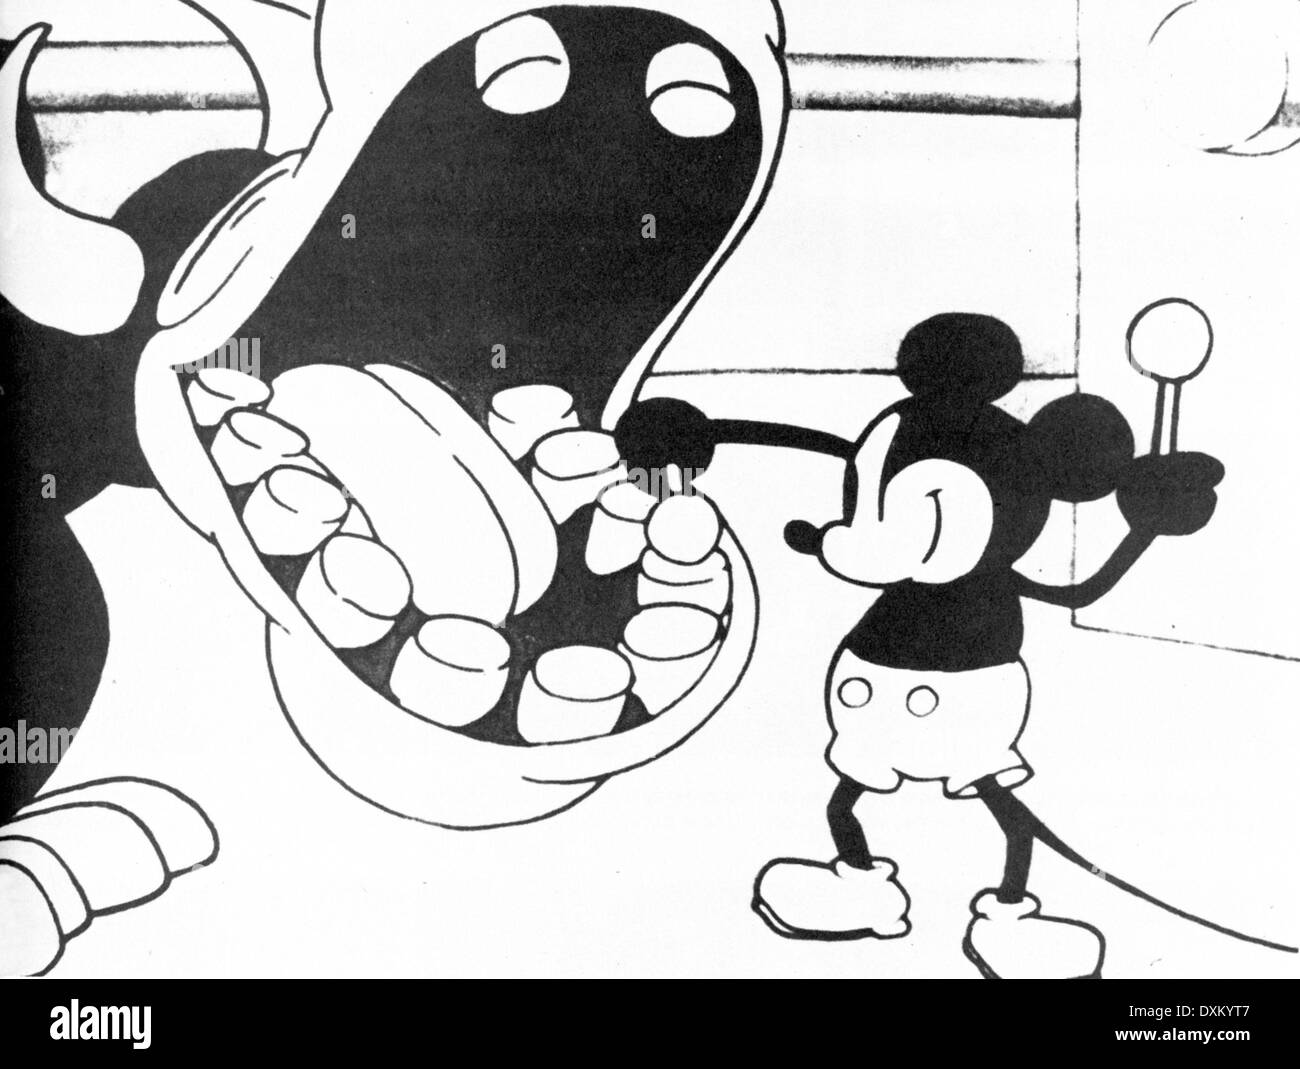 Steamboat Willie Stock Photos & Steamboat Willie Stock Images - Alamy